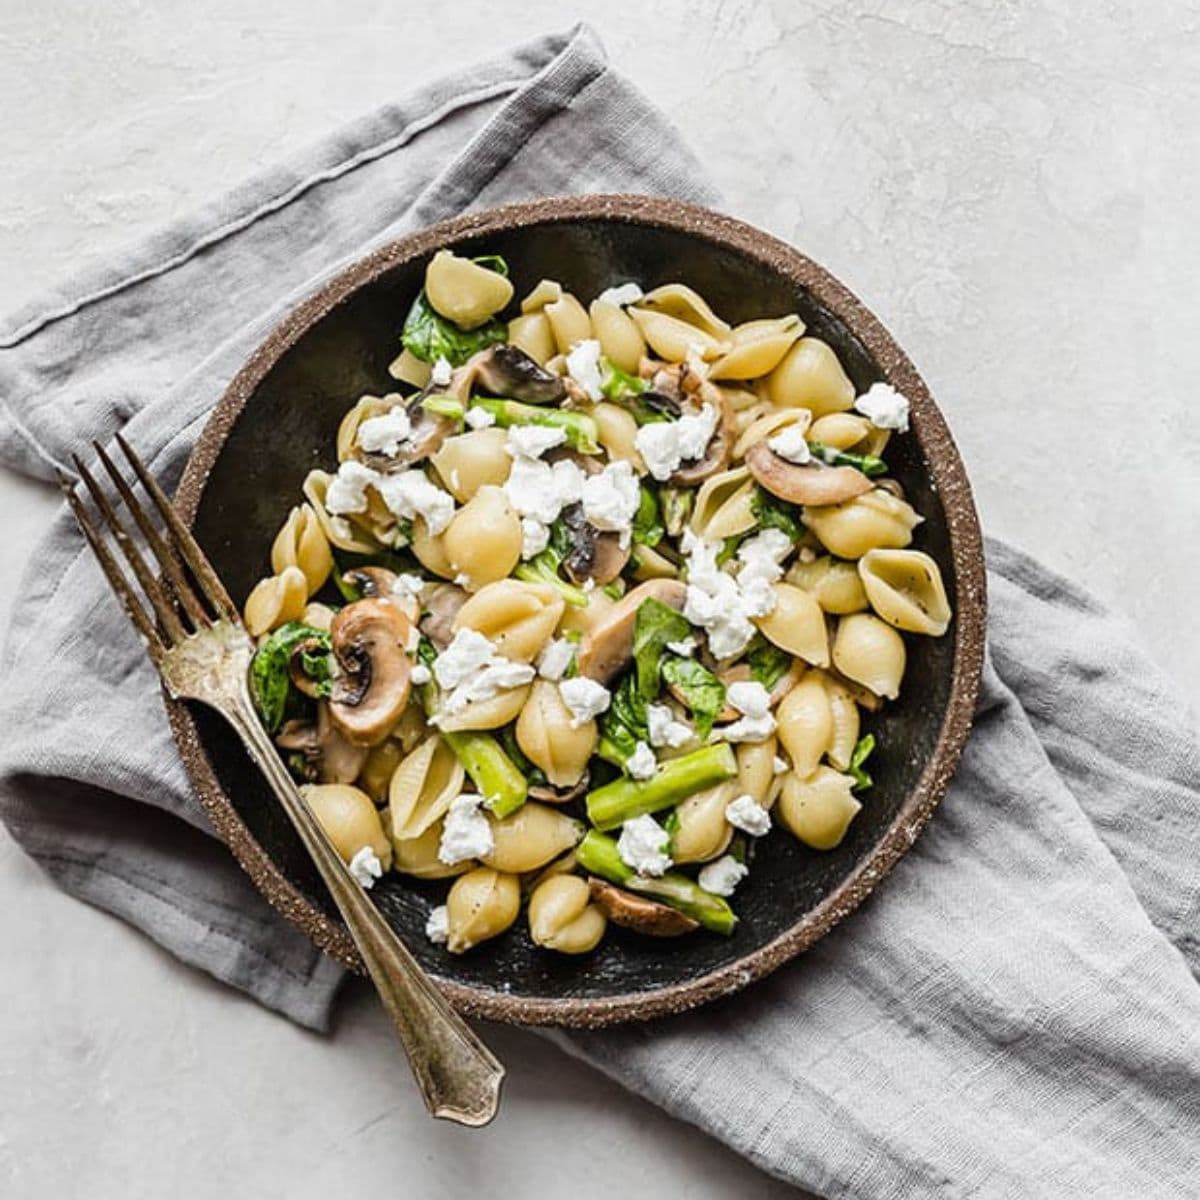 Bowl of pasta with asparagus, spinach, mushrooms and goat cheese.